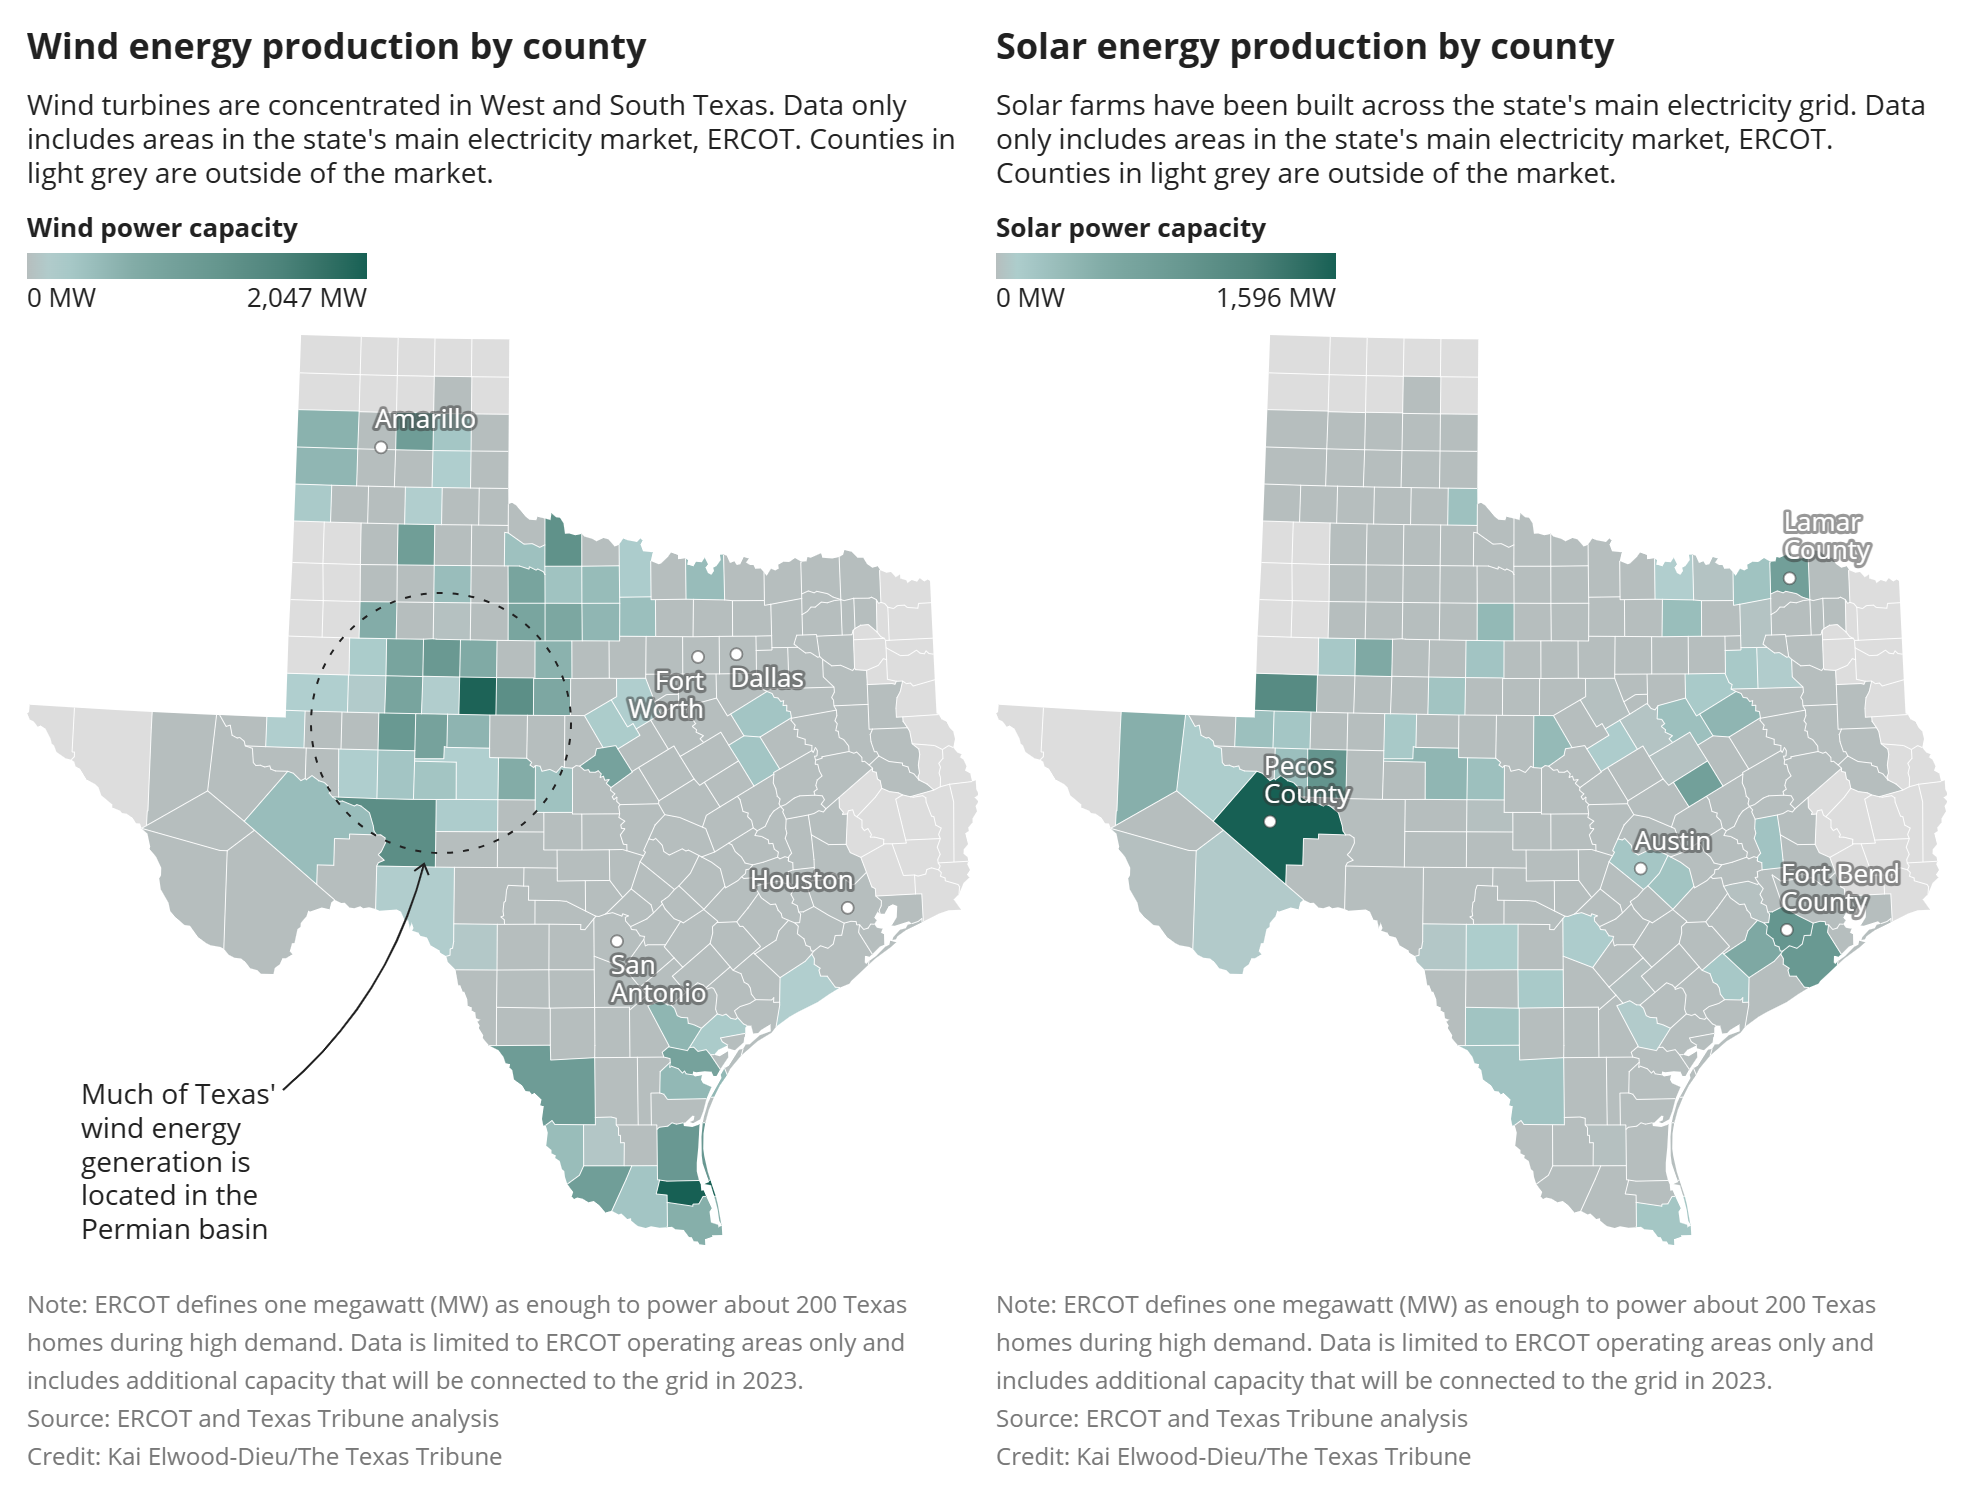 Wind and solar energy production by county in Texas. Data: ERCOT and Texas Tribune analysis. Graphic: Kai Elwood-Dieu / The Texas Tribune